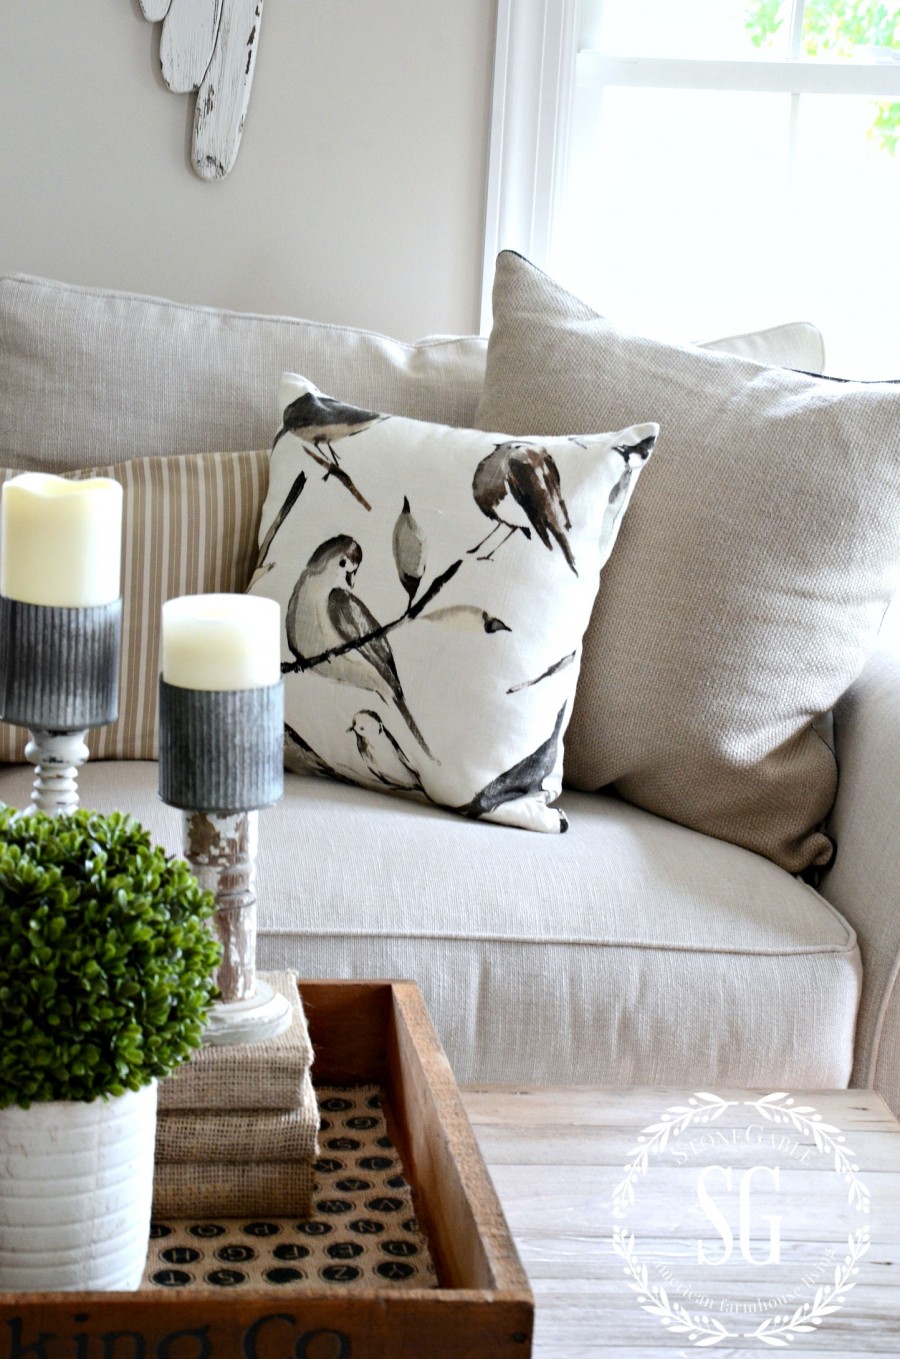 5 INEXPENSIVE WAYS TO REFRESH YOUR LIVING ROOM- Change up pillows-stonegableblog.com